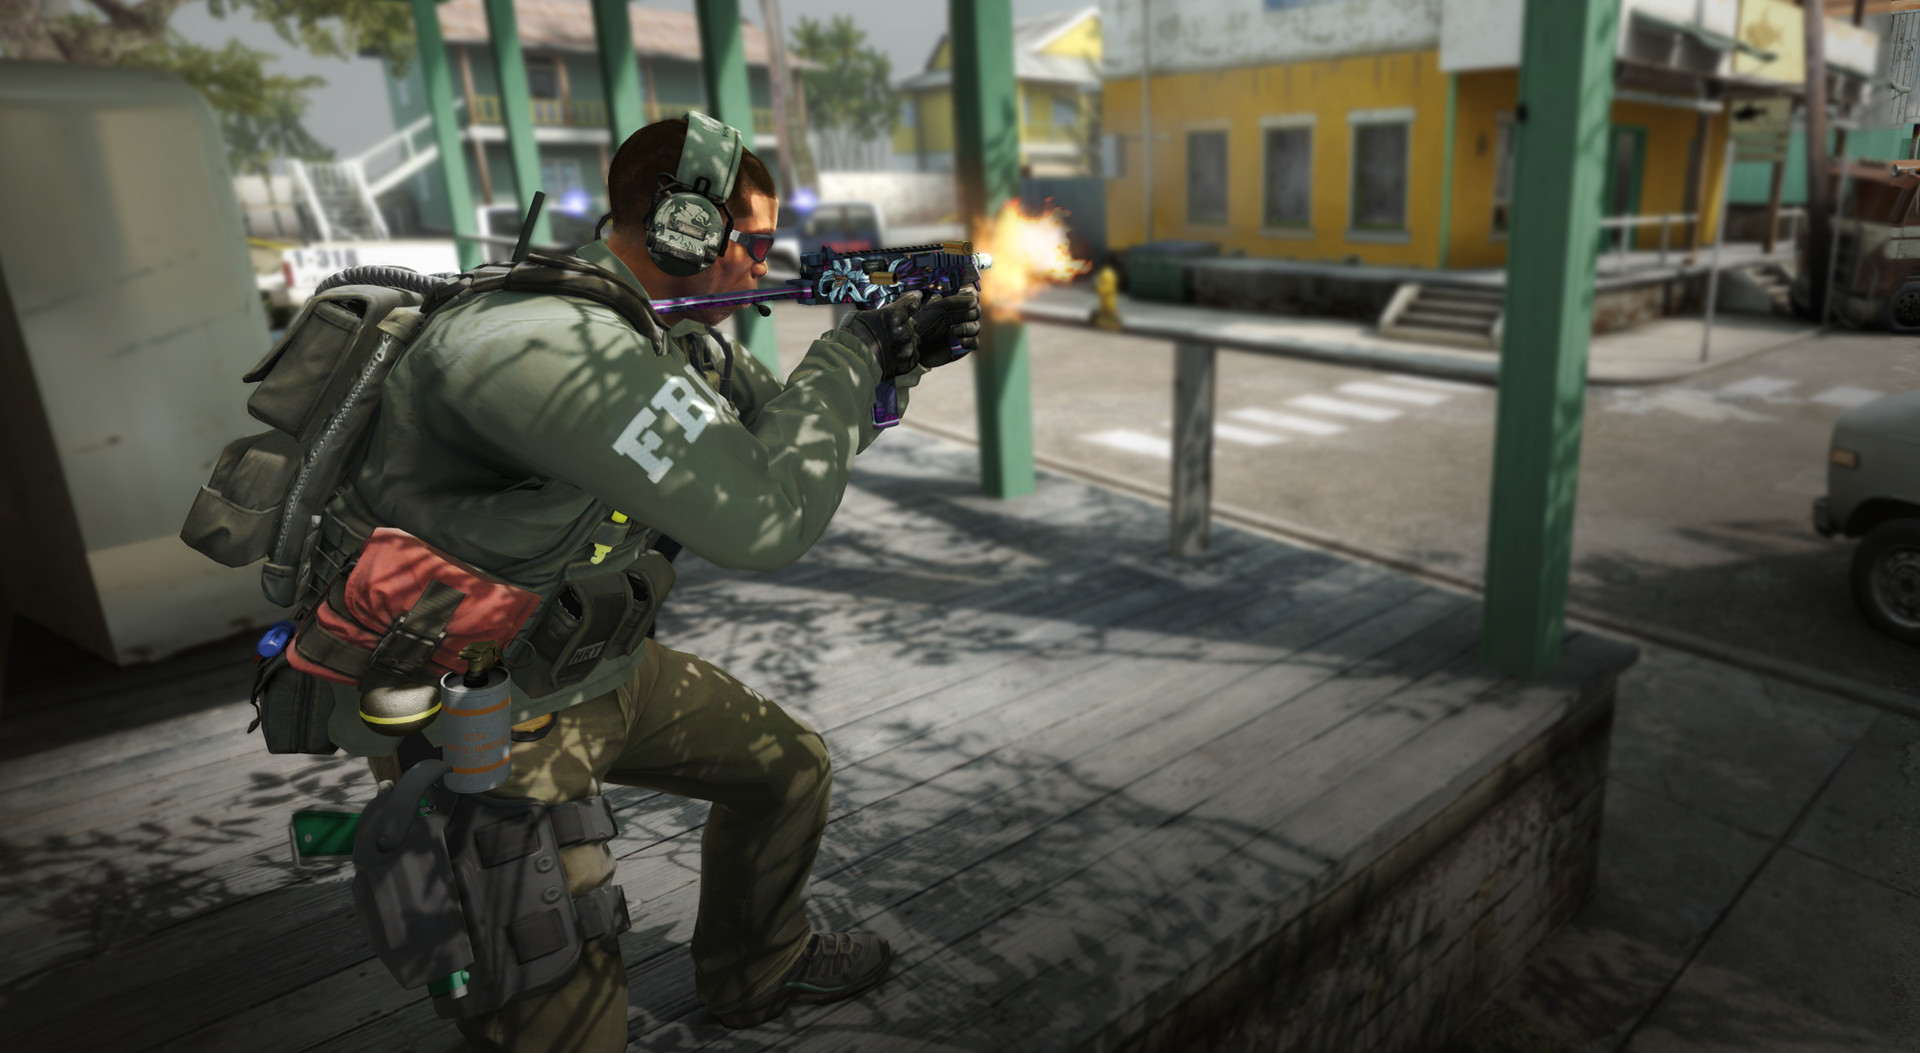 Counter-Strike 2 confirmed by Valve, and it's coming, for free